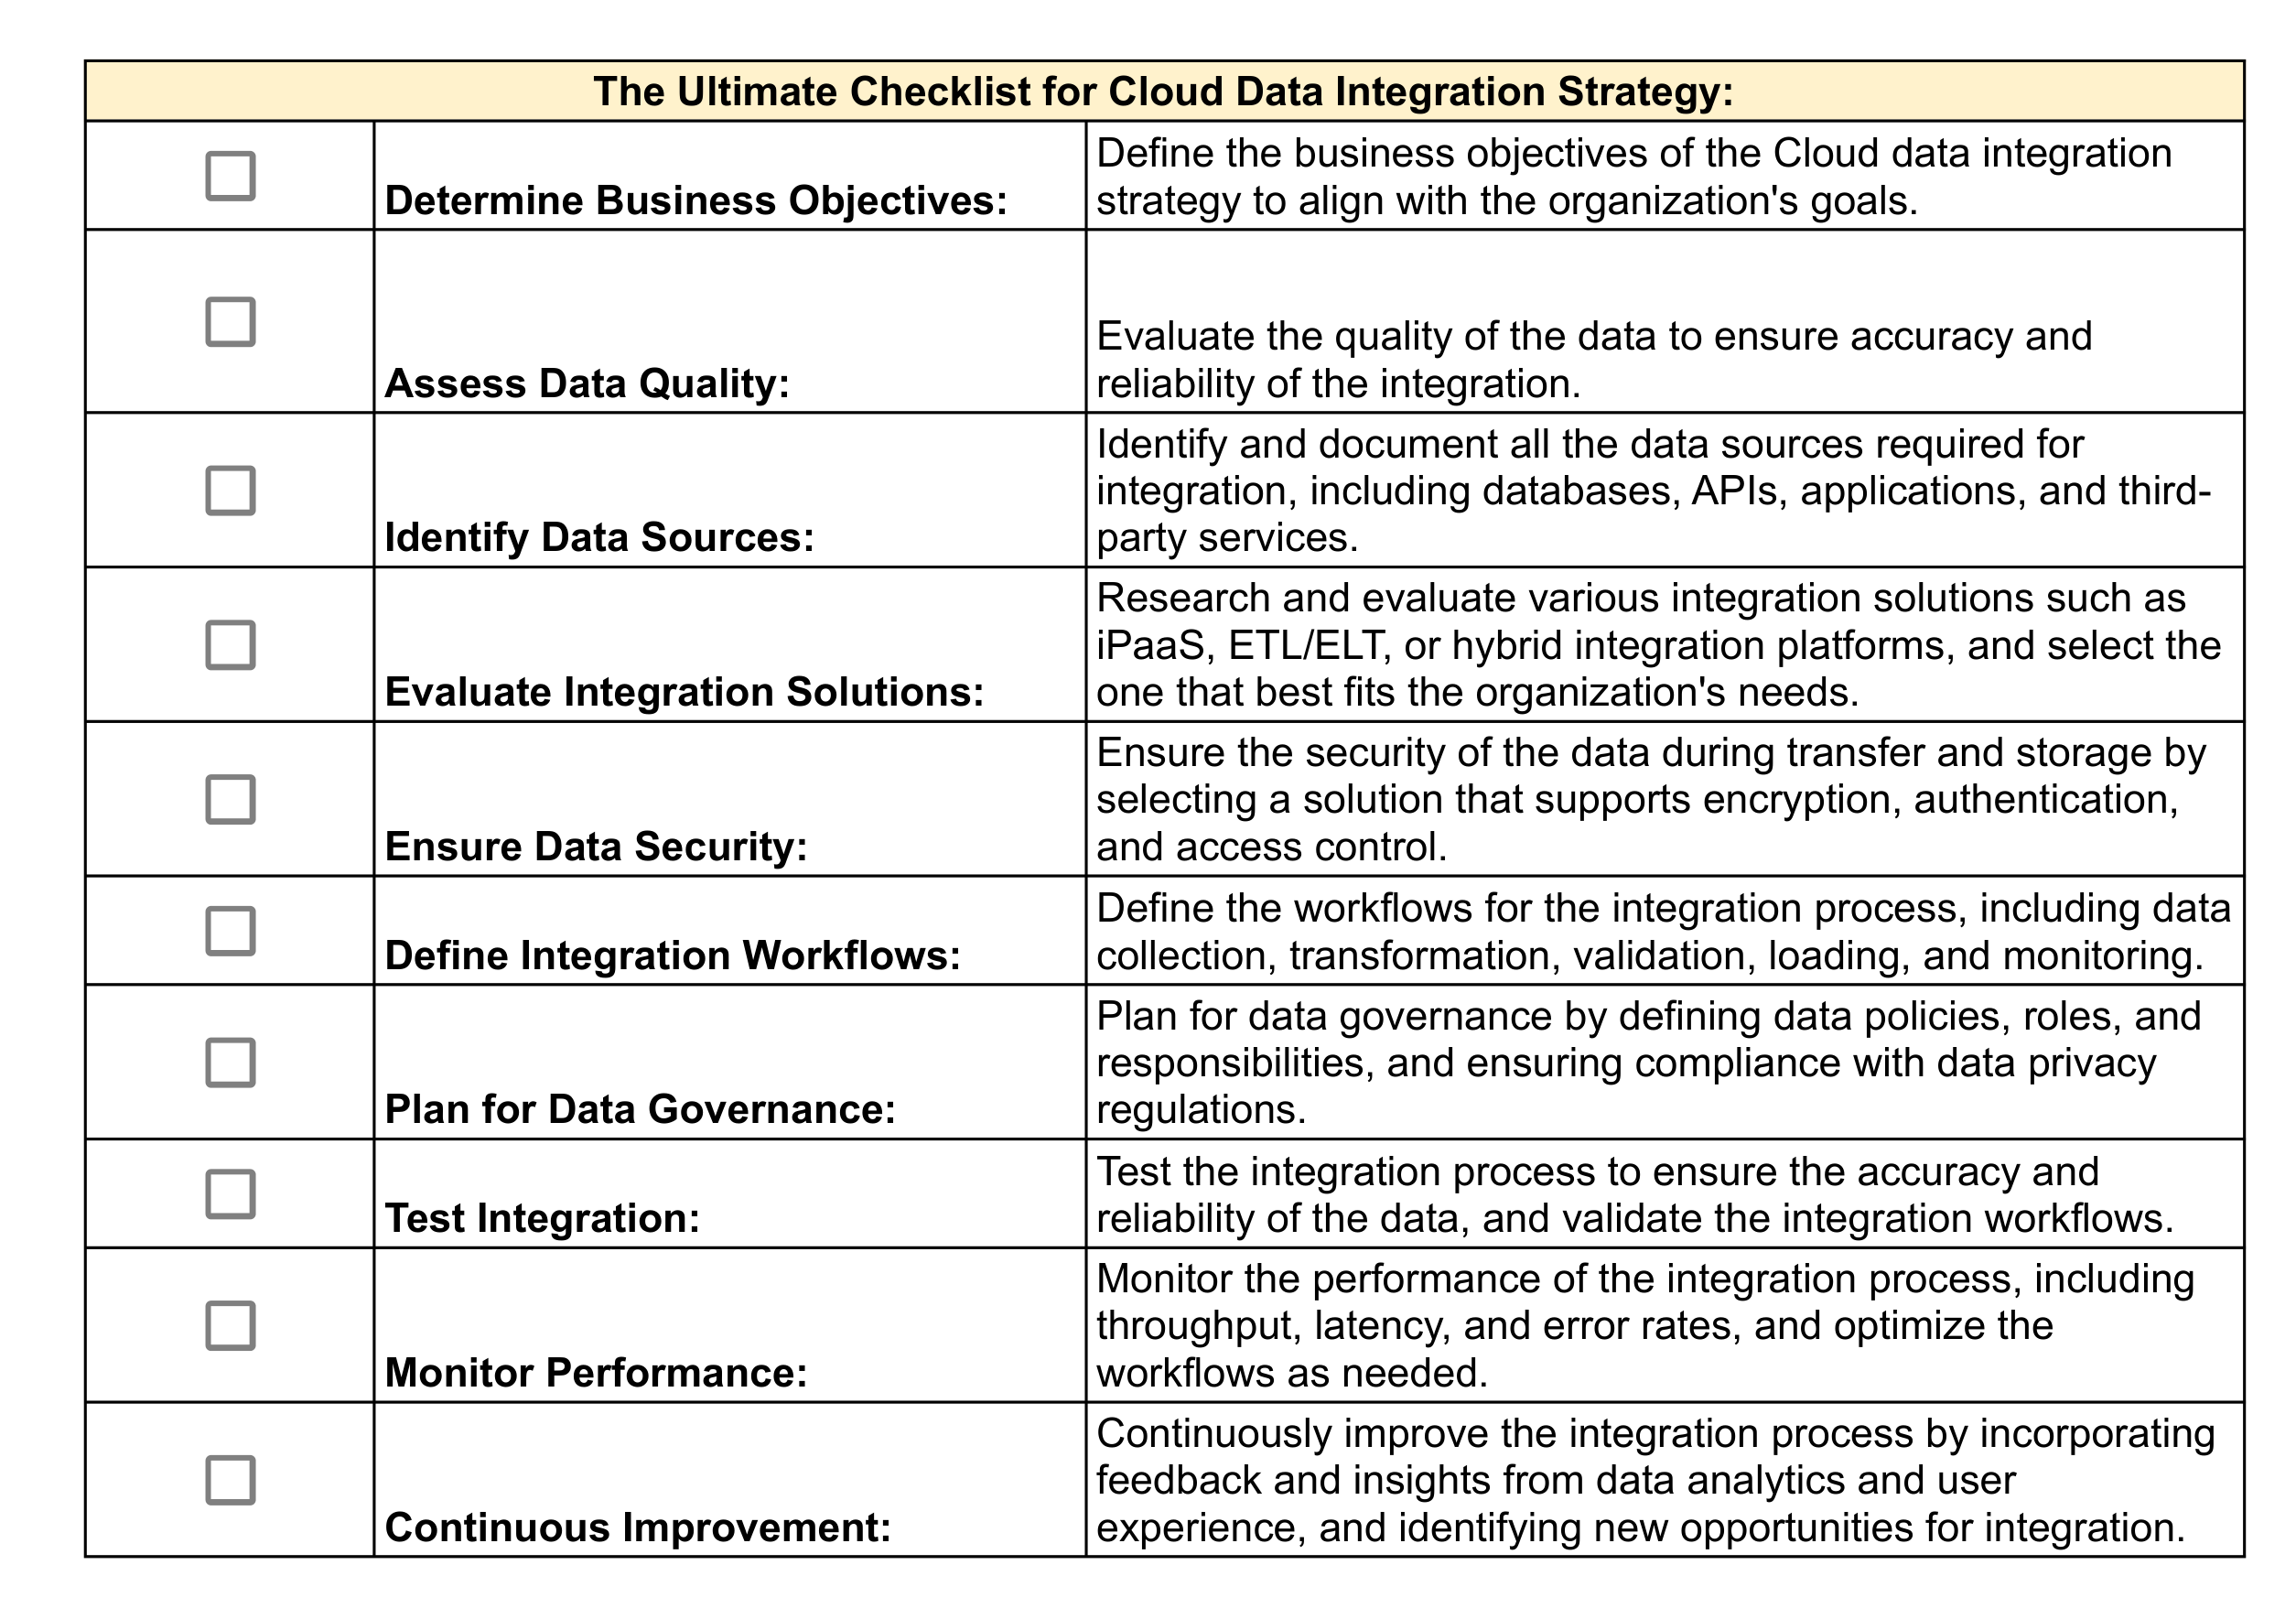 The Ultimate Checklist for Cloud Data Integration